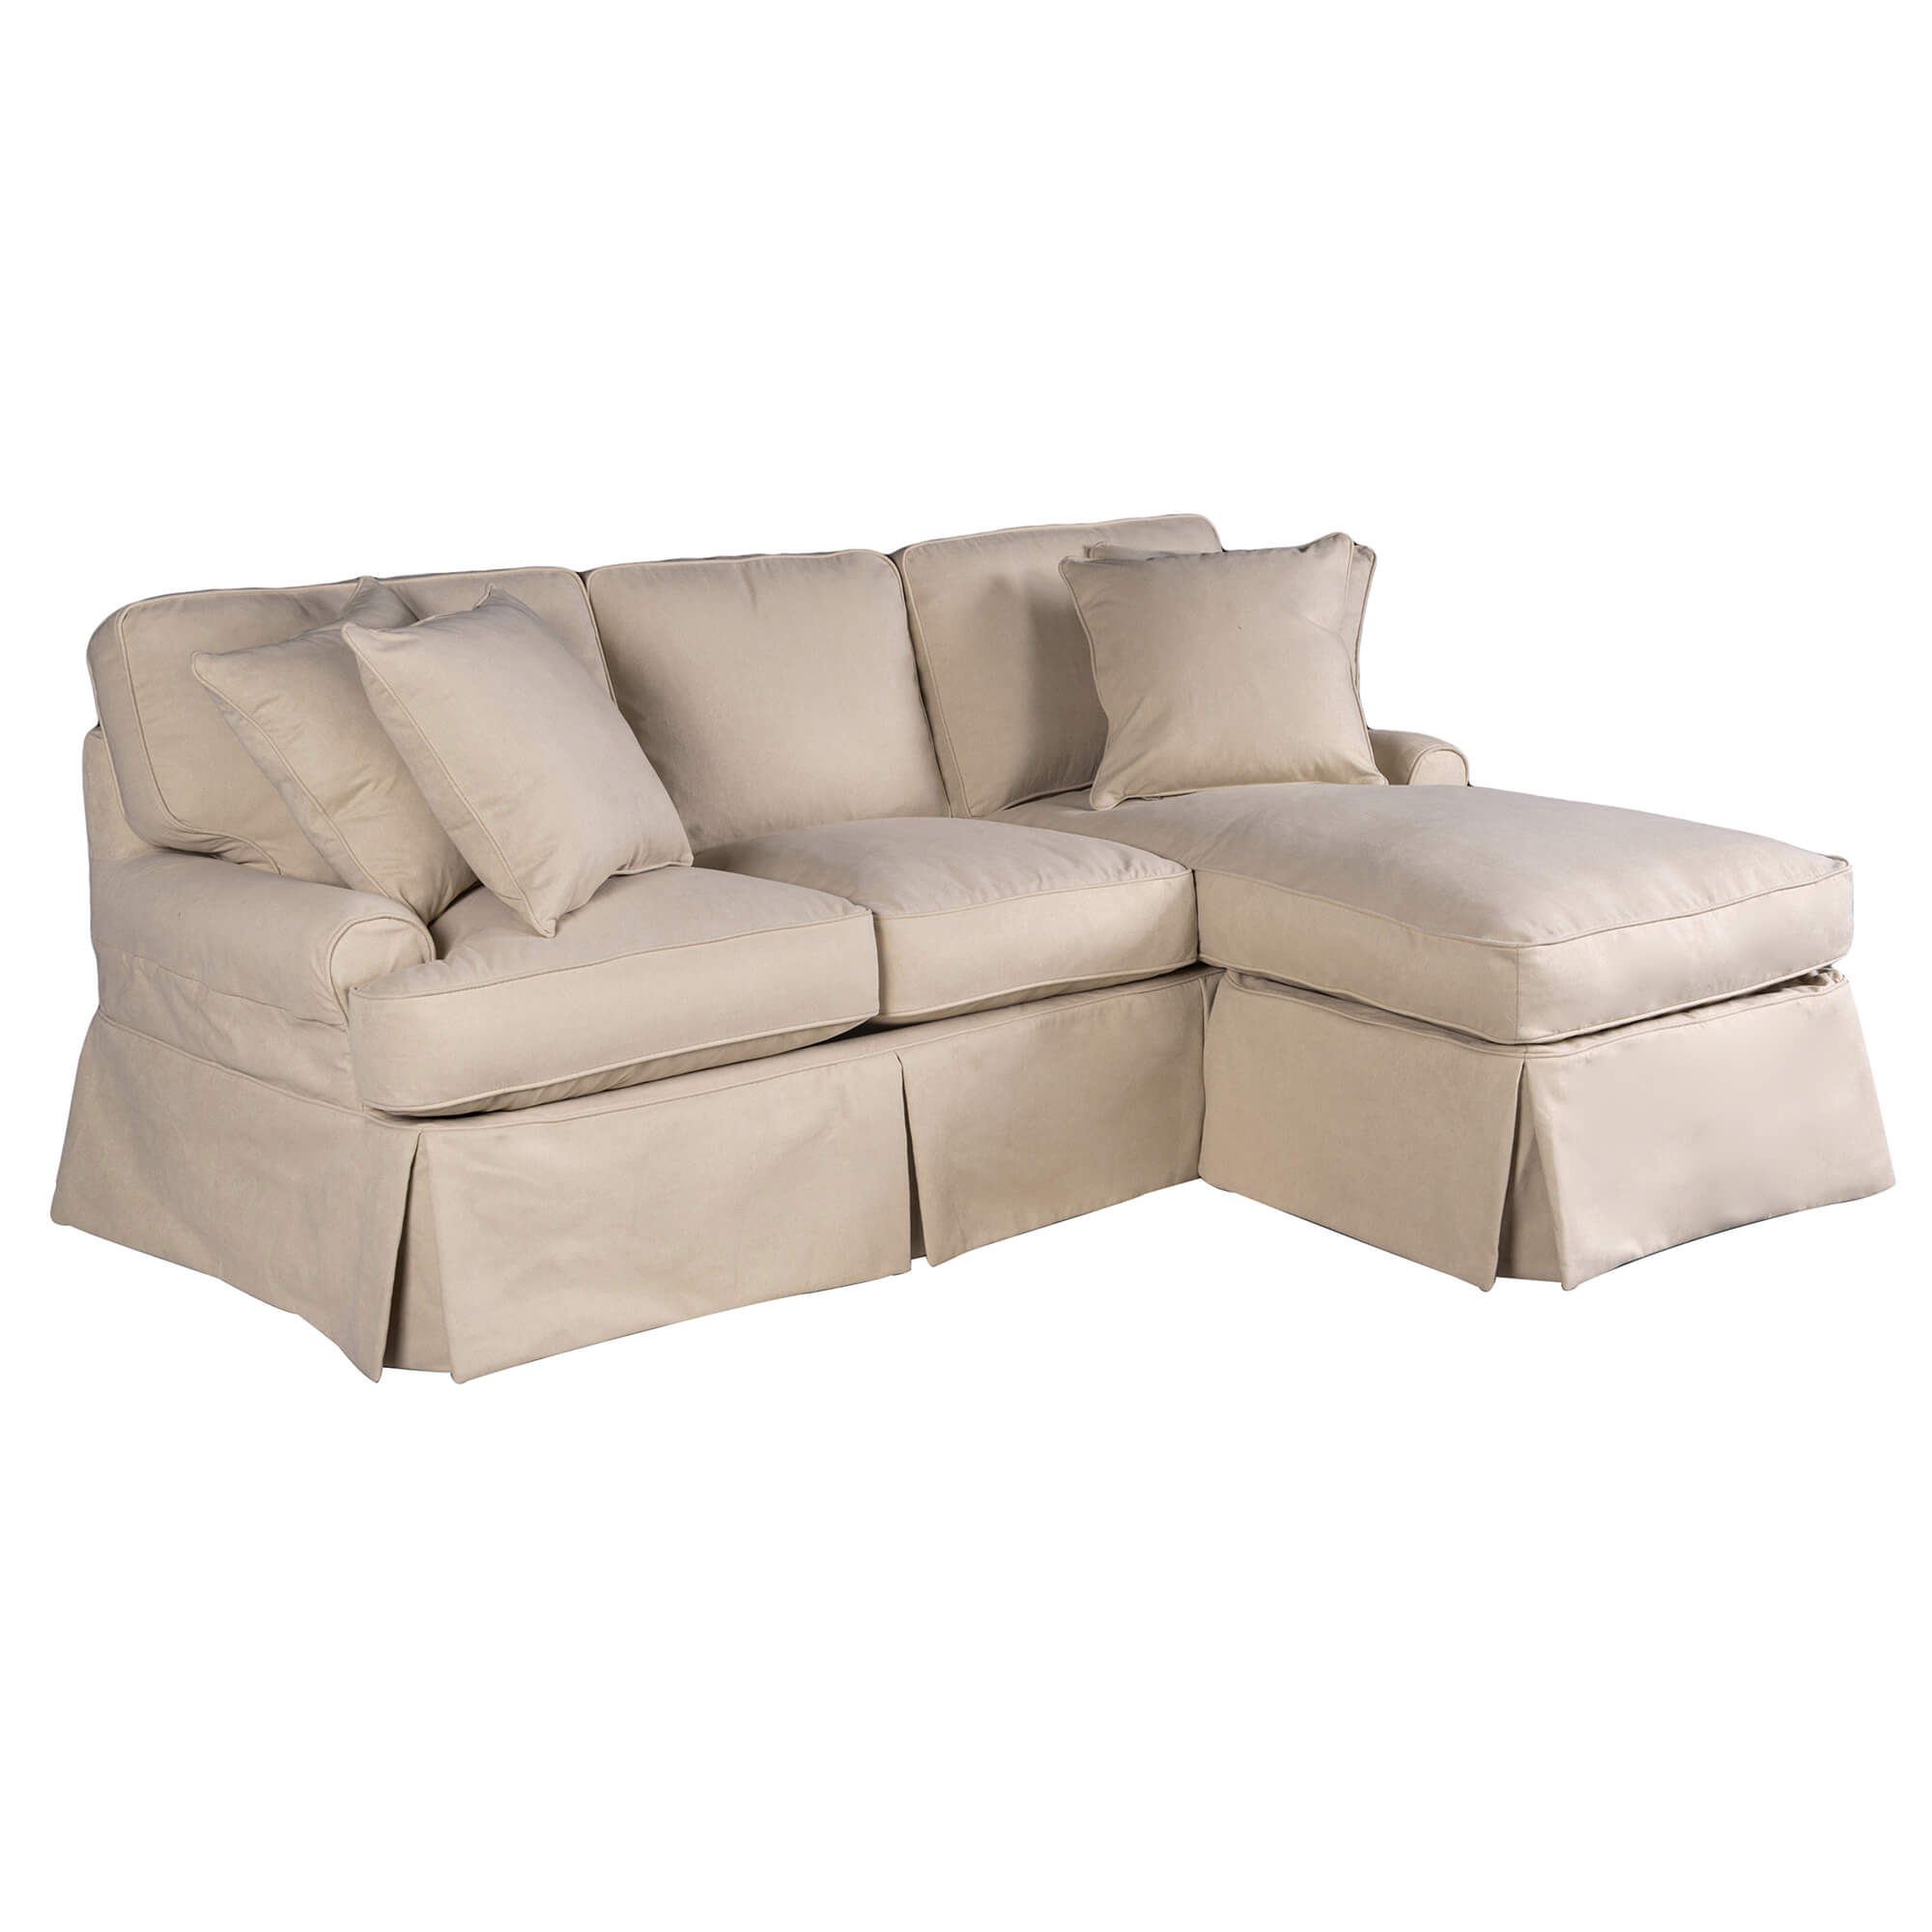 Ashley Marelton Denim Right-Arm Facing Full Sofa Sleeper on sale at  Bargains and Buyouts, serving Tri-County, West Chester and Winton Woods in  Cincinnati, OH